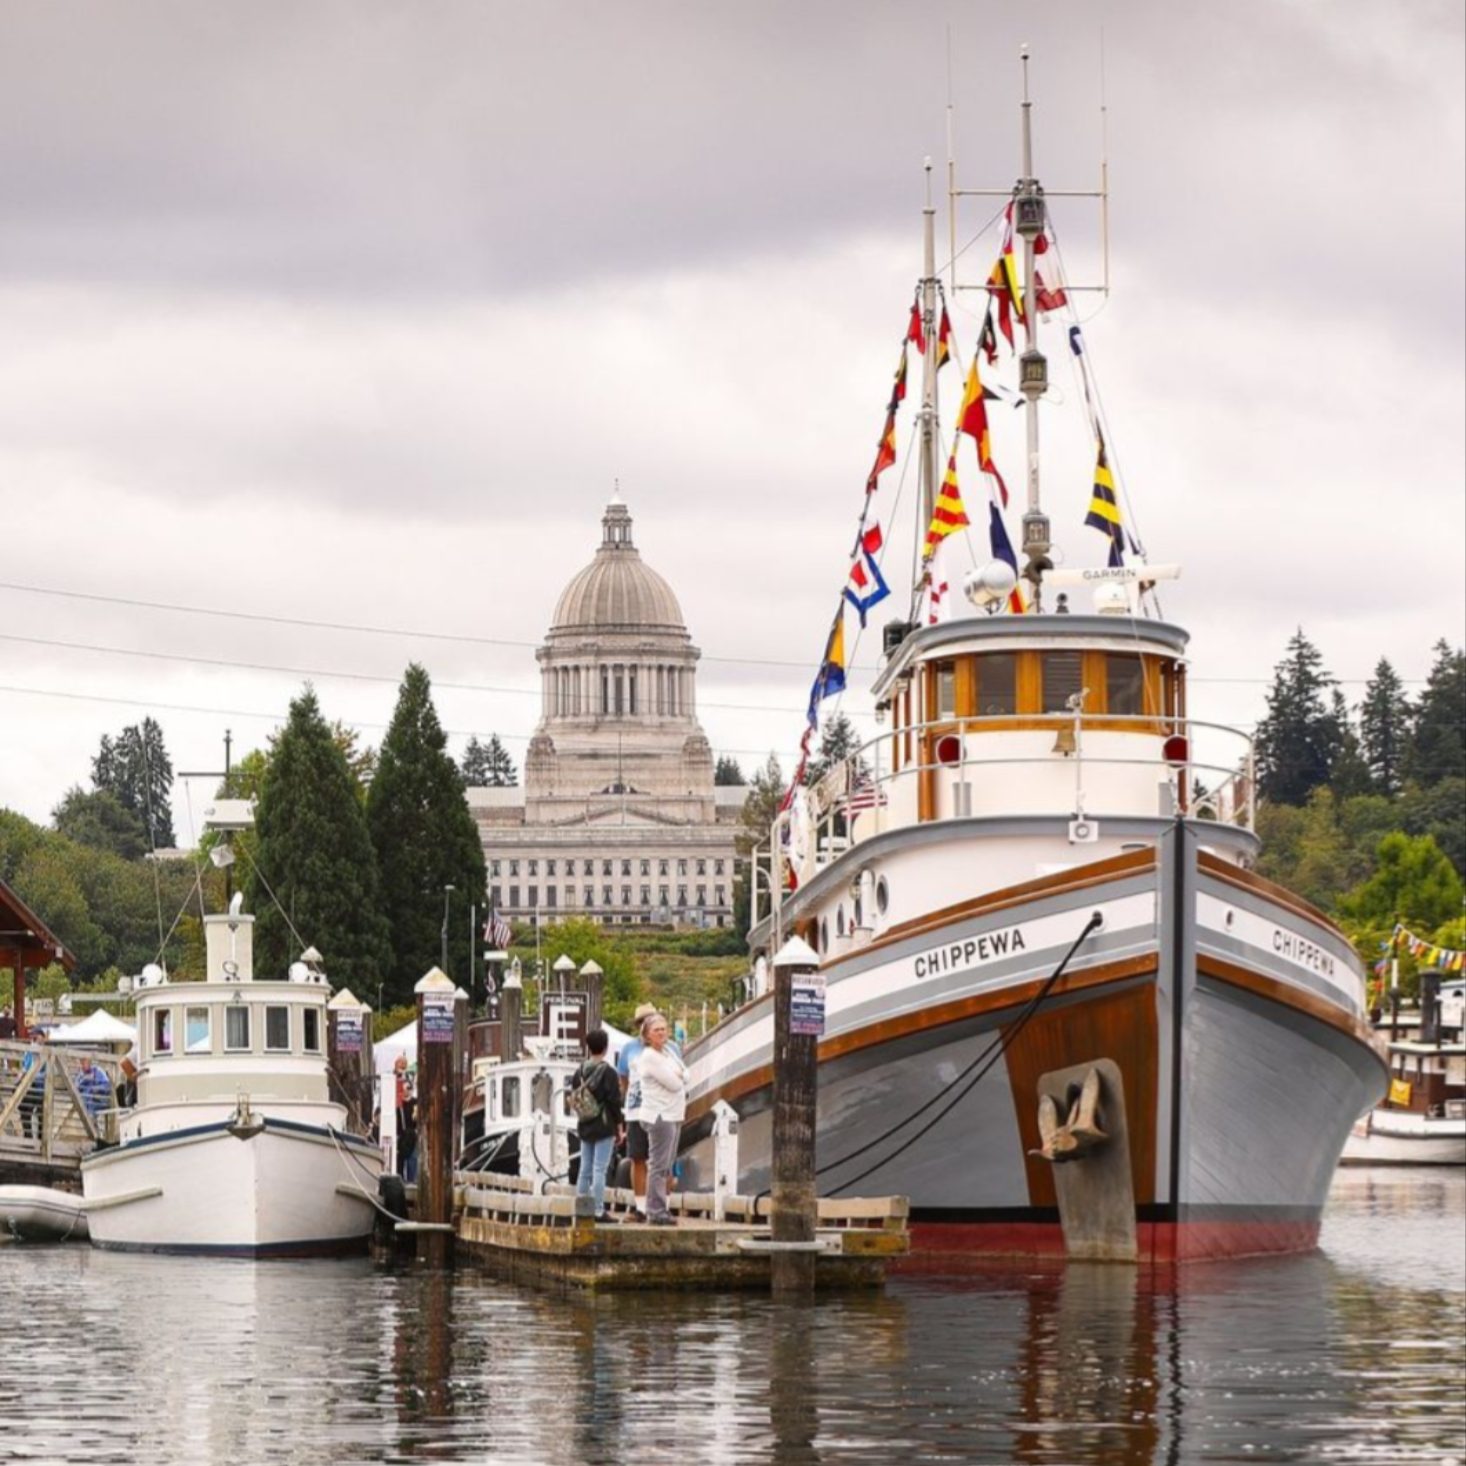 Tug Chippewa on the water with the Olympia capital in the background